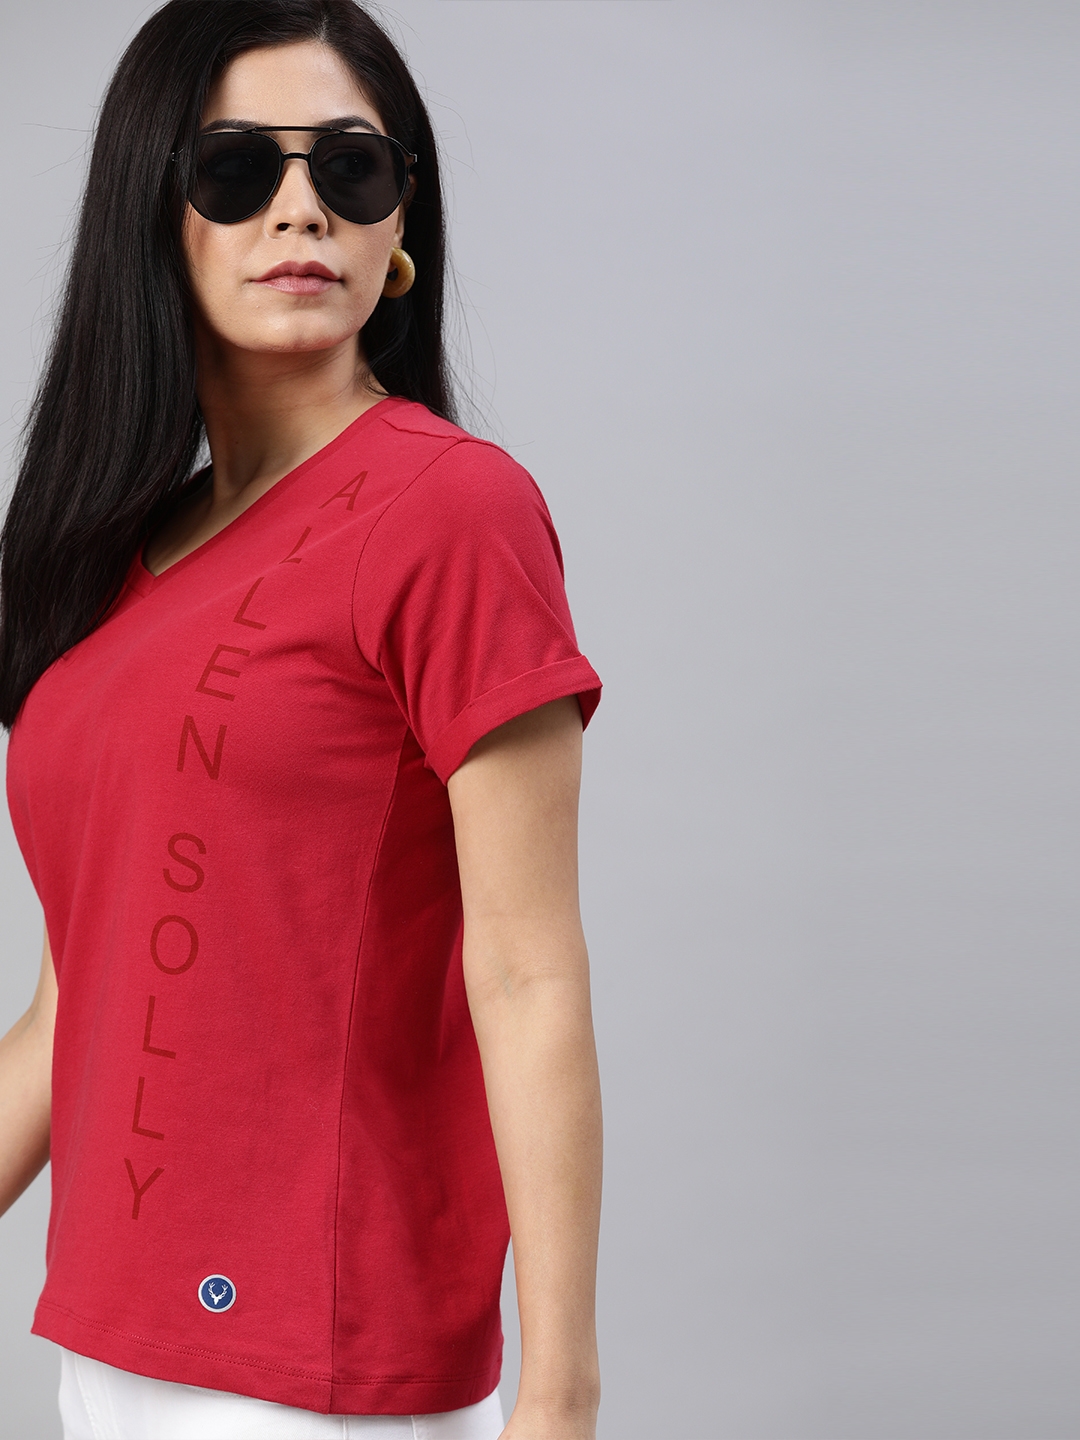 Allen Solly Woman Women Red Printed Round Neck T shirt